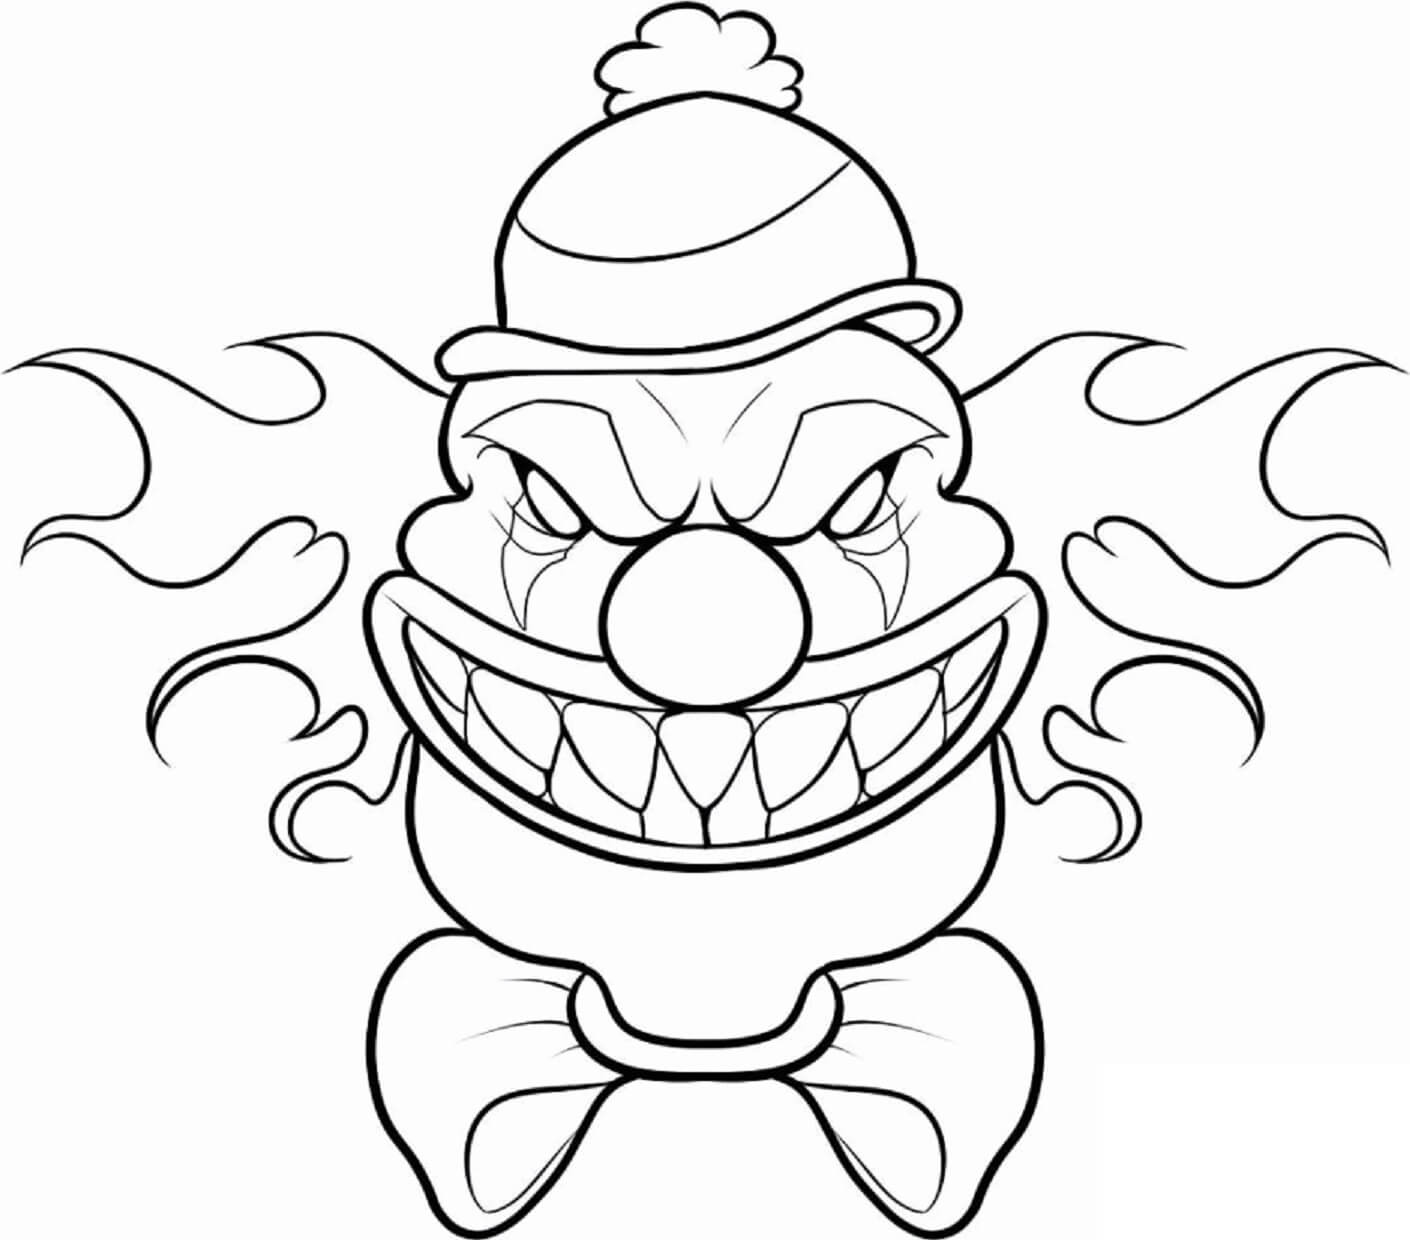 Scary clown face coloring page